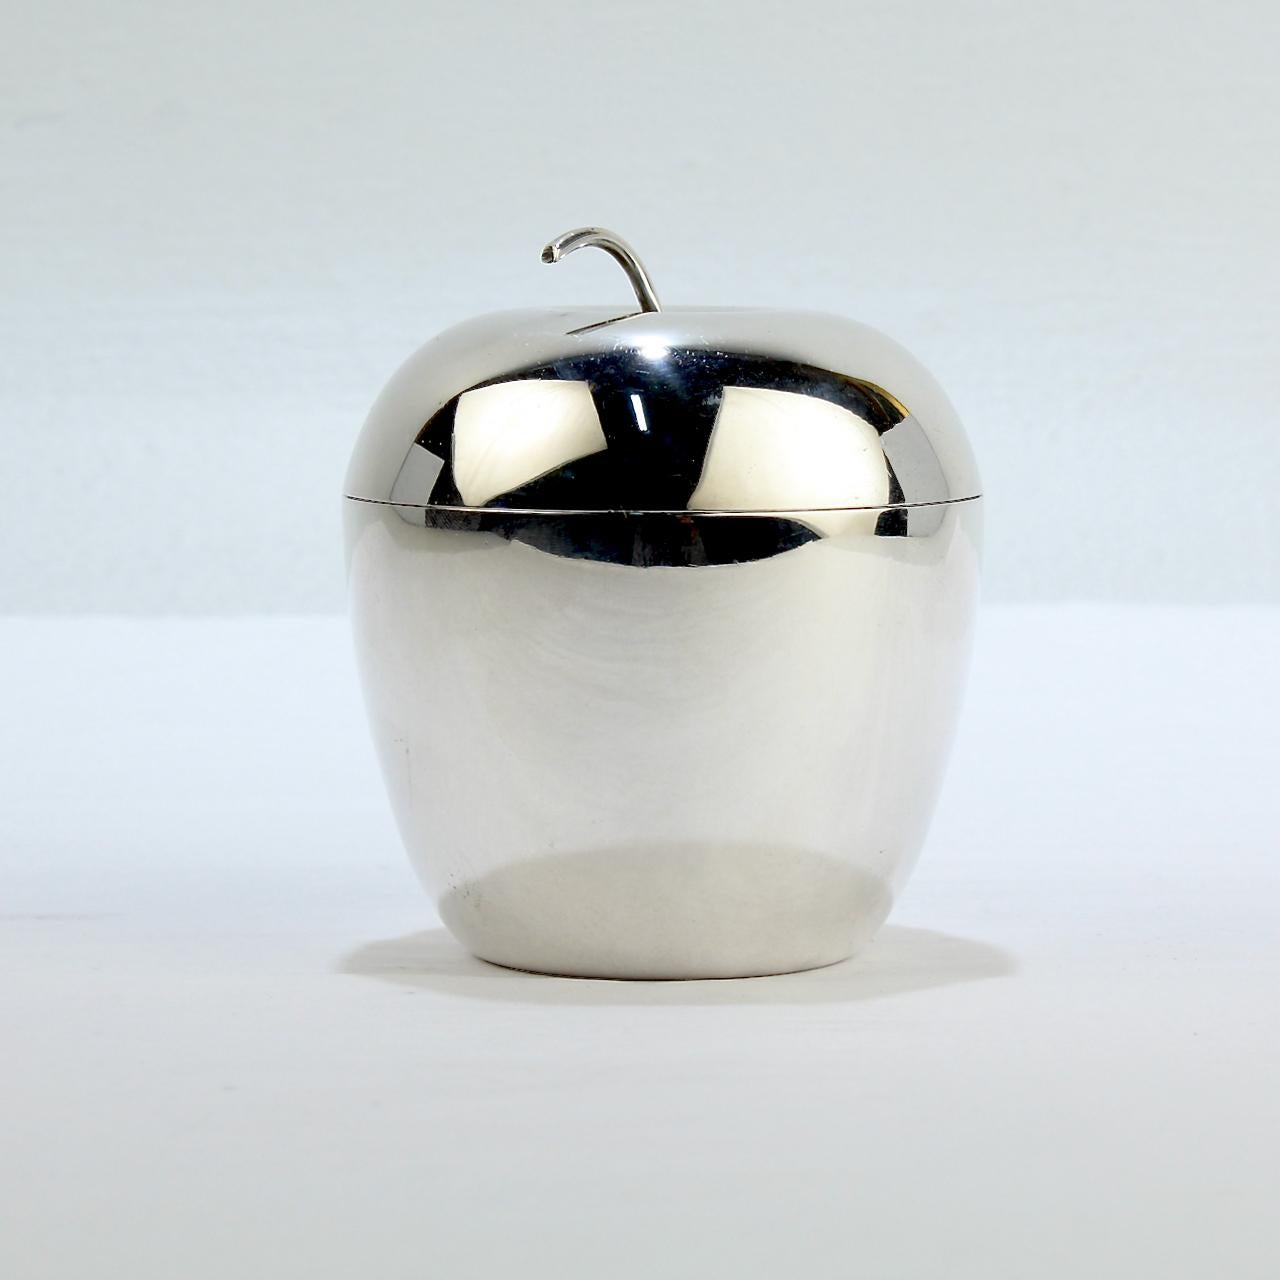 A terrific apple shaped covered box.

In sterling silver and marked for J. E. Caldwell.

A wonderful vintage box with great design!

Date:
20th Century

Overall Condition:
It is in overall good, as-pictured, used estate condition with some fine &